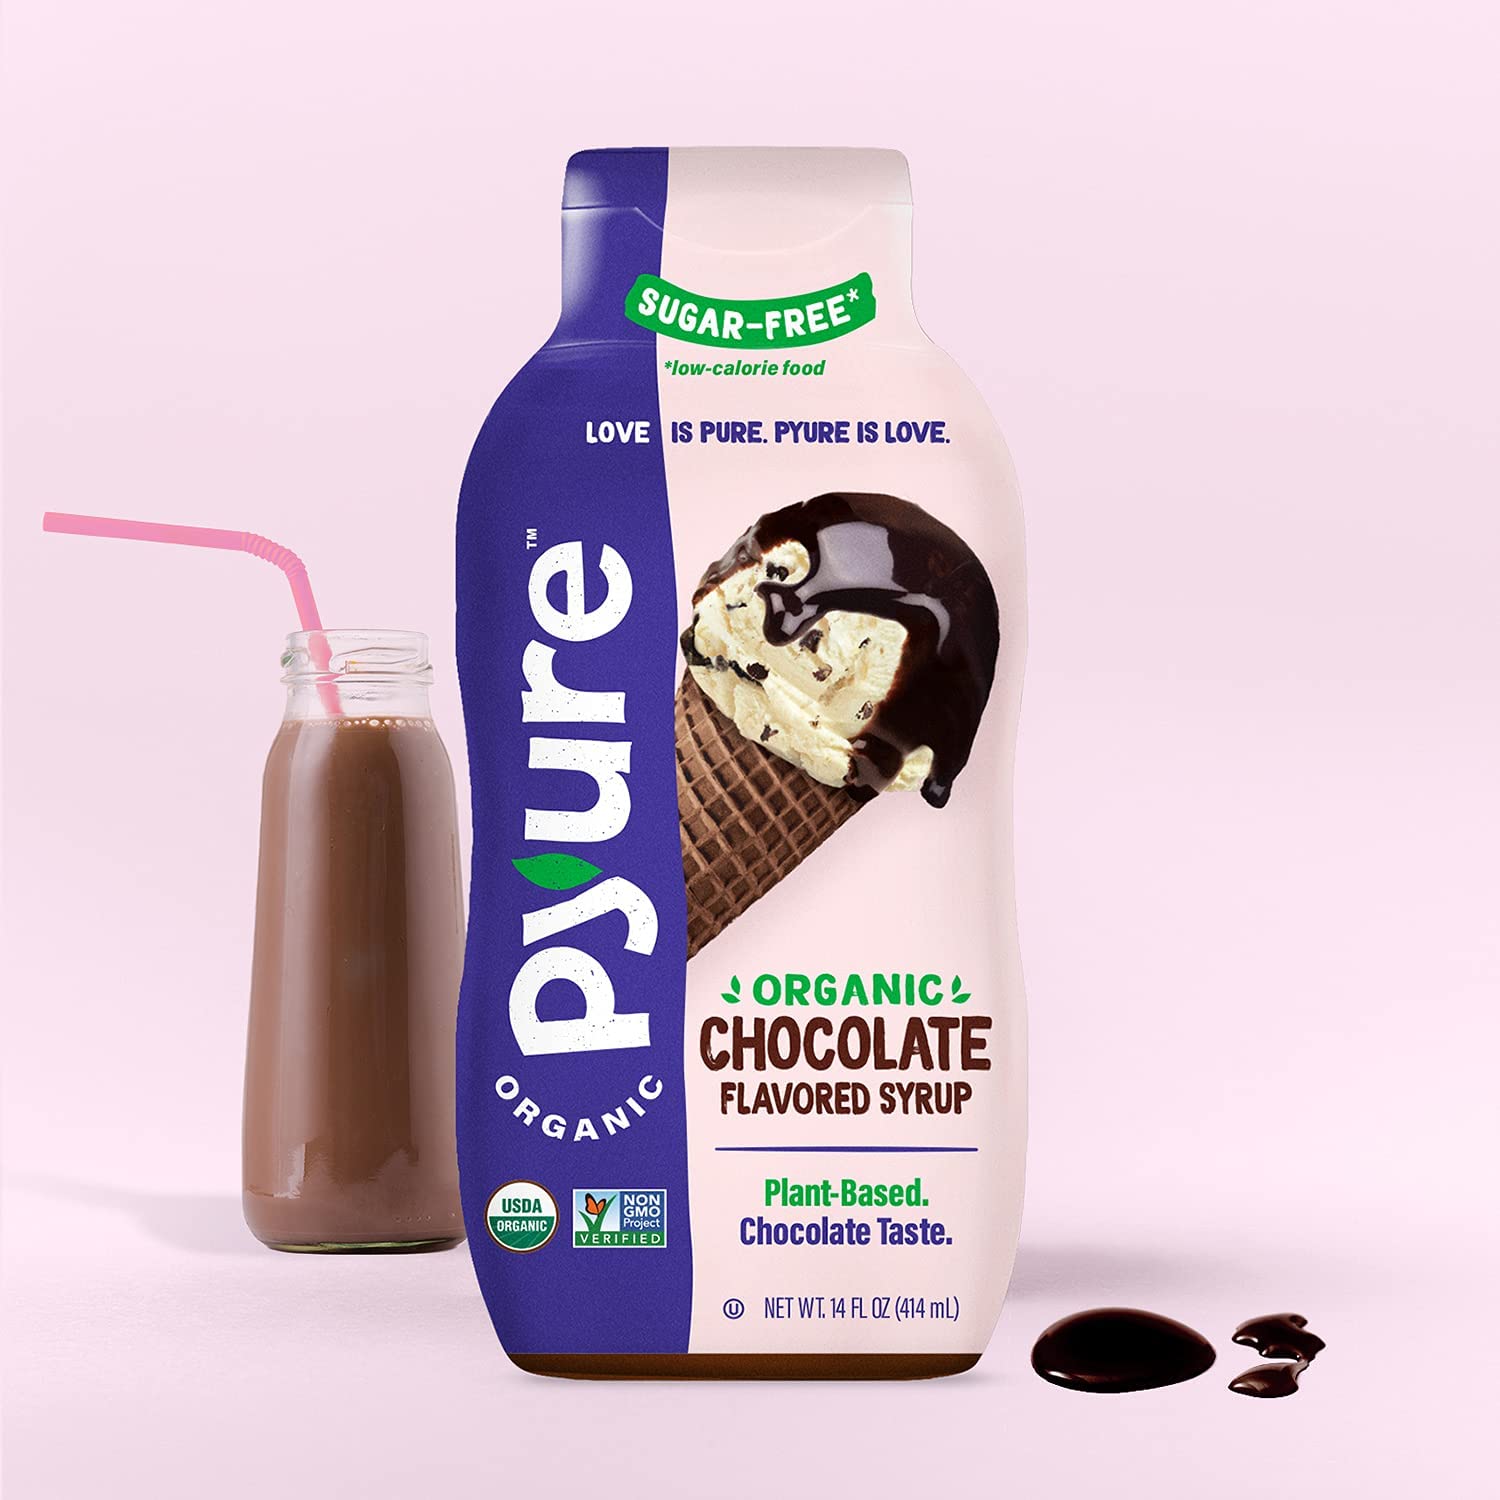 Pyure Organic Chocolate Flavored Syrup, Zero Sugar, 1 Net Carb Keto Syrup, Gluten-Free, Organic Plant-Based Sugar Free Chocolate Syrup for Vegan Keto Friendly Food, 14 Oz : Everything Else